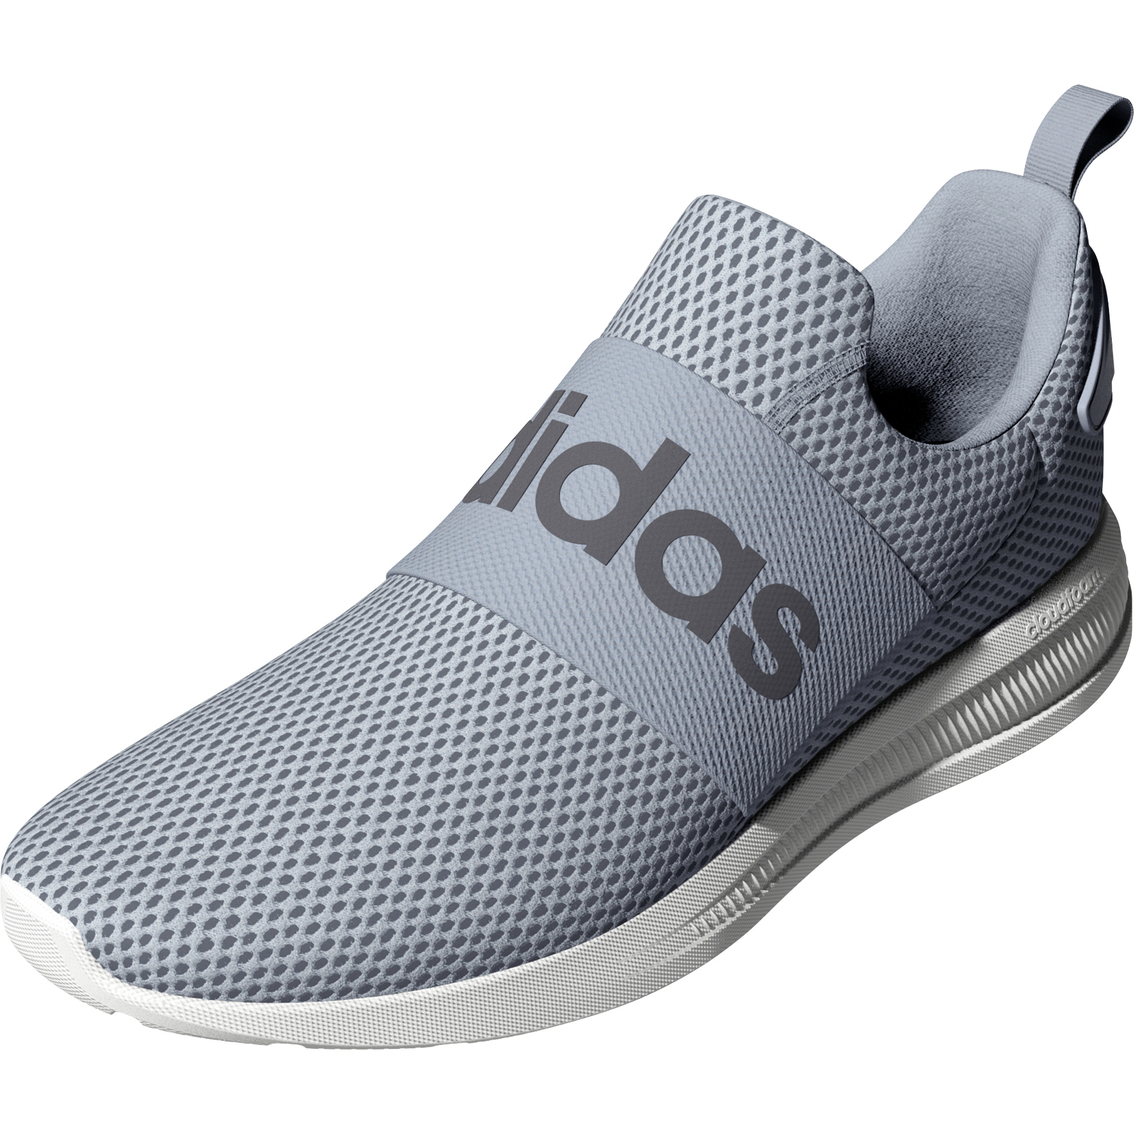 Adidas Lite Racer Adapter 4.0 Running Shoes | Sneakers | Shoes | Shop ...